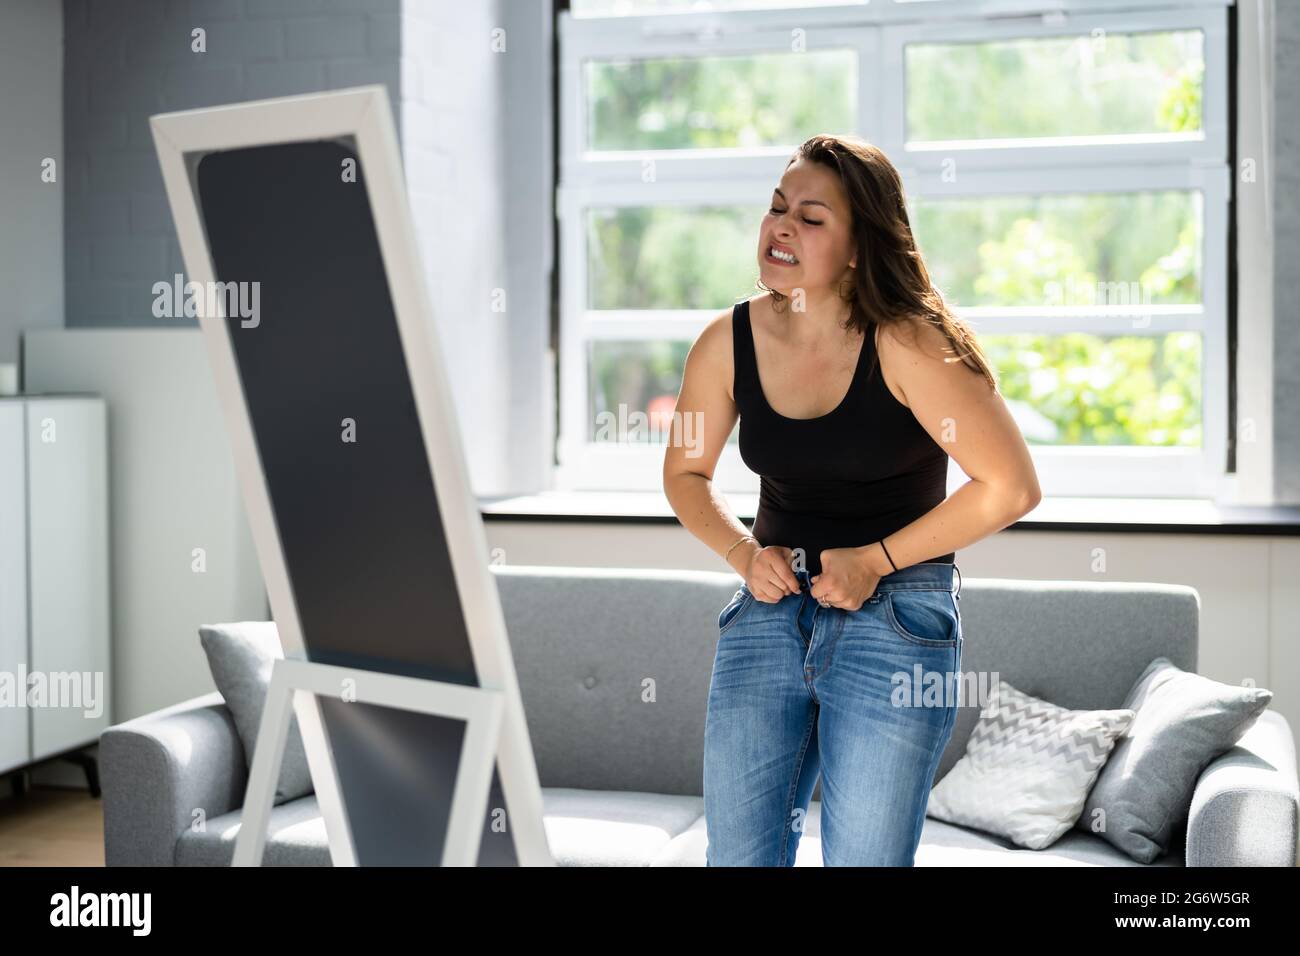 Woman Struggling With Tight Jeans. Weight Gain Stock Photo - Alamy